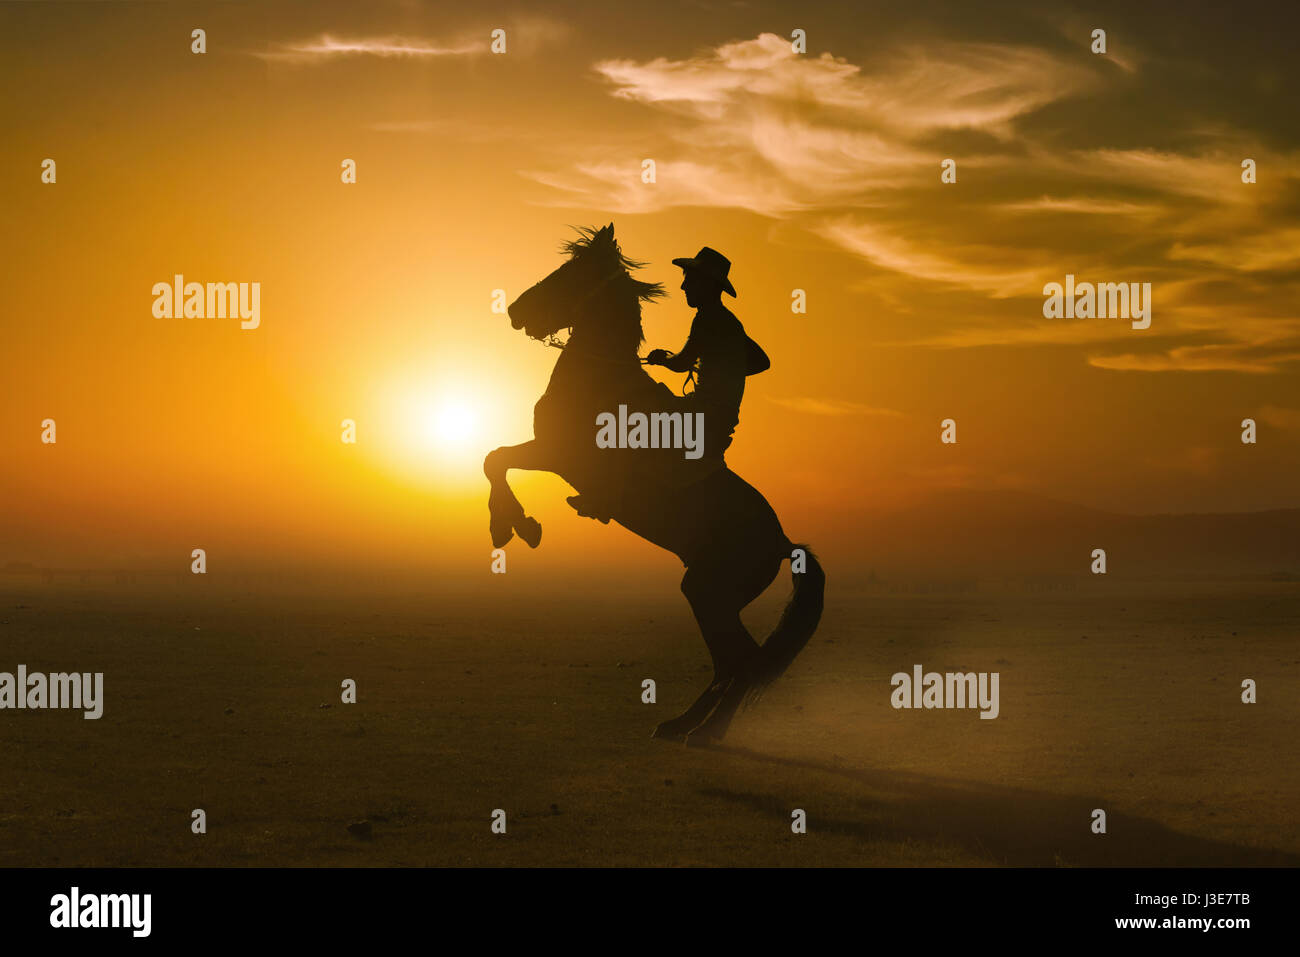 silhouette riding a horse on sunset background Stock Photo